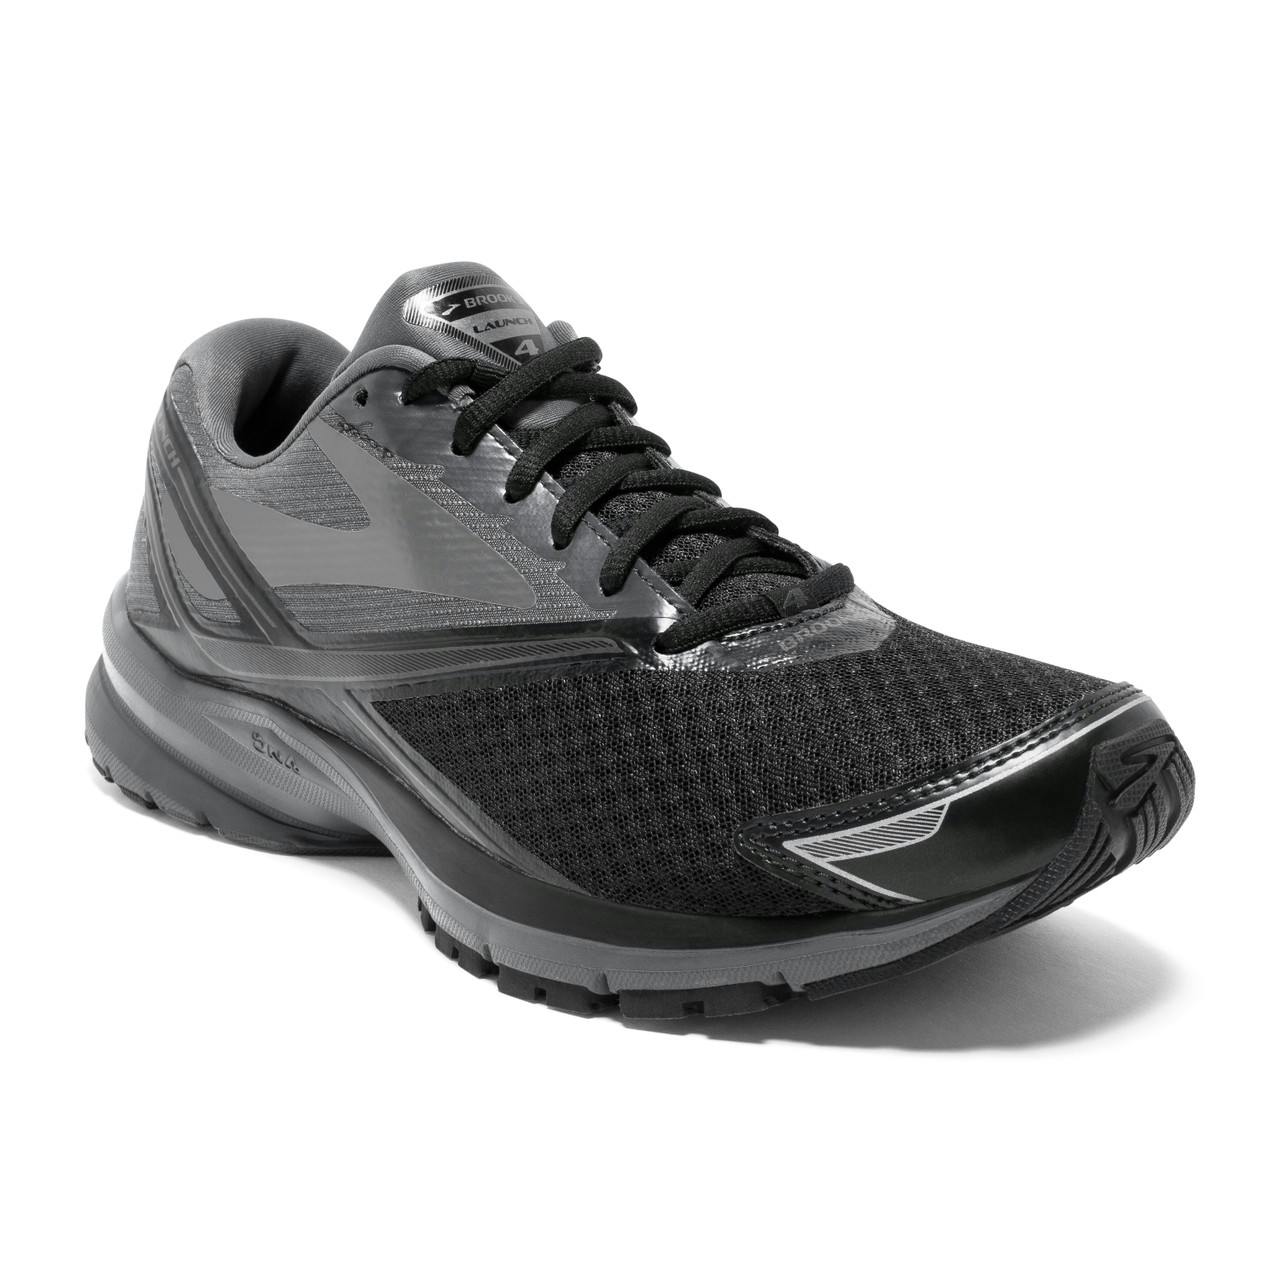 Launch 4 Road Running Shoes Black/Anthracite